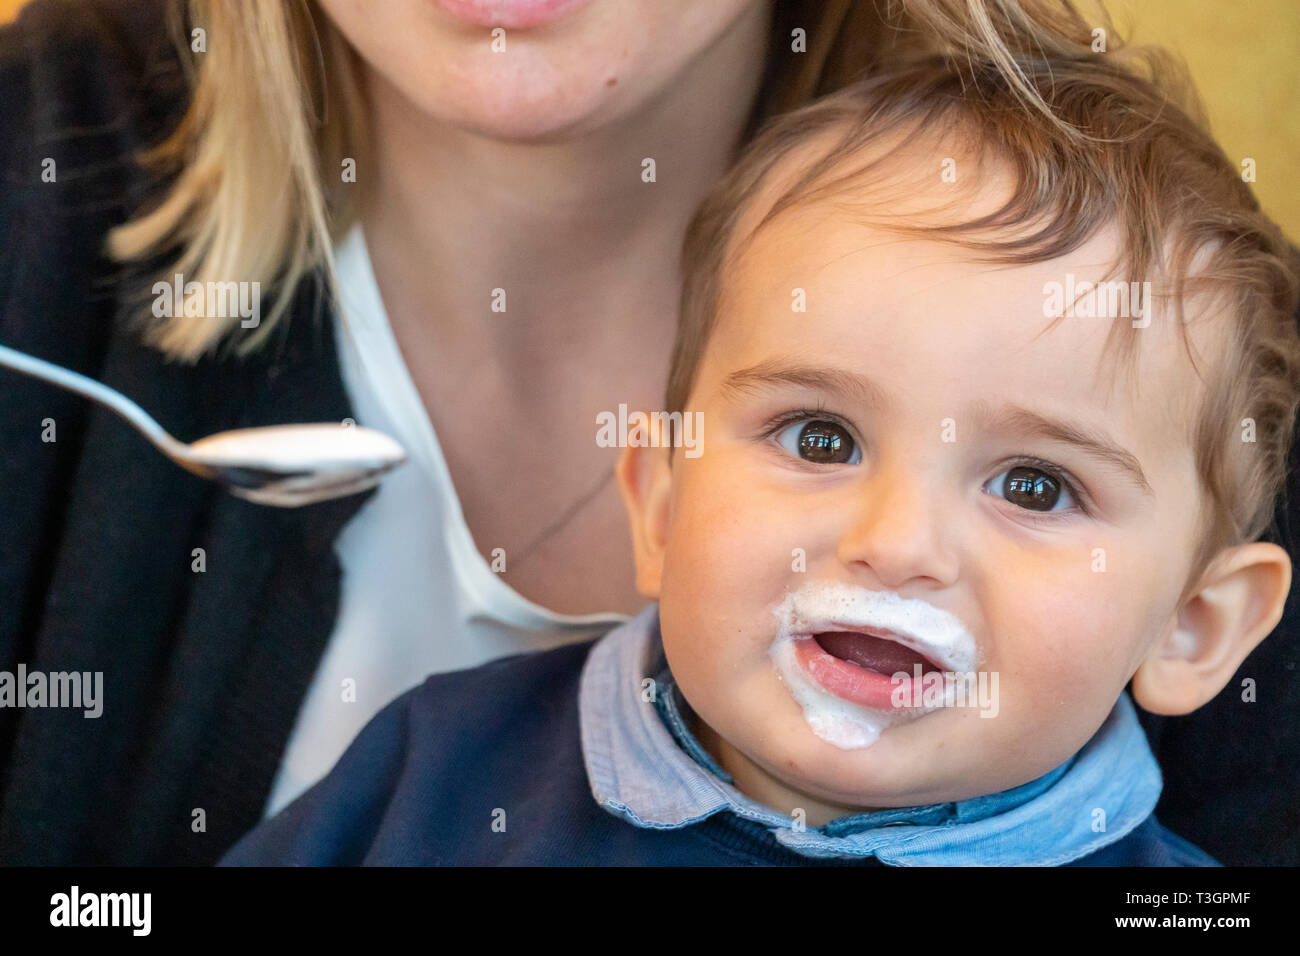 Very cute baby boy with milk mustache smiling at the camera Stock ...